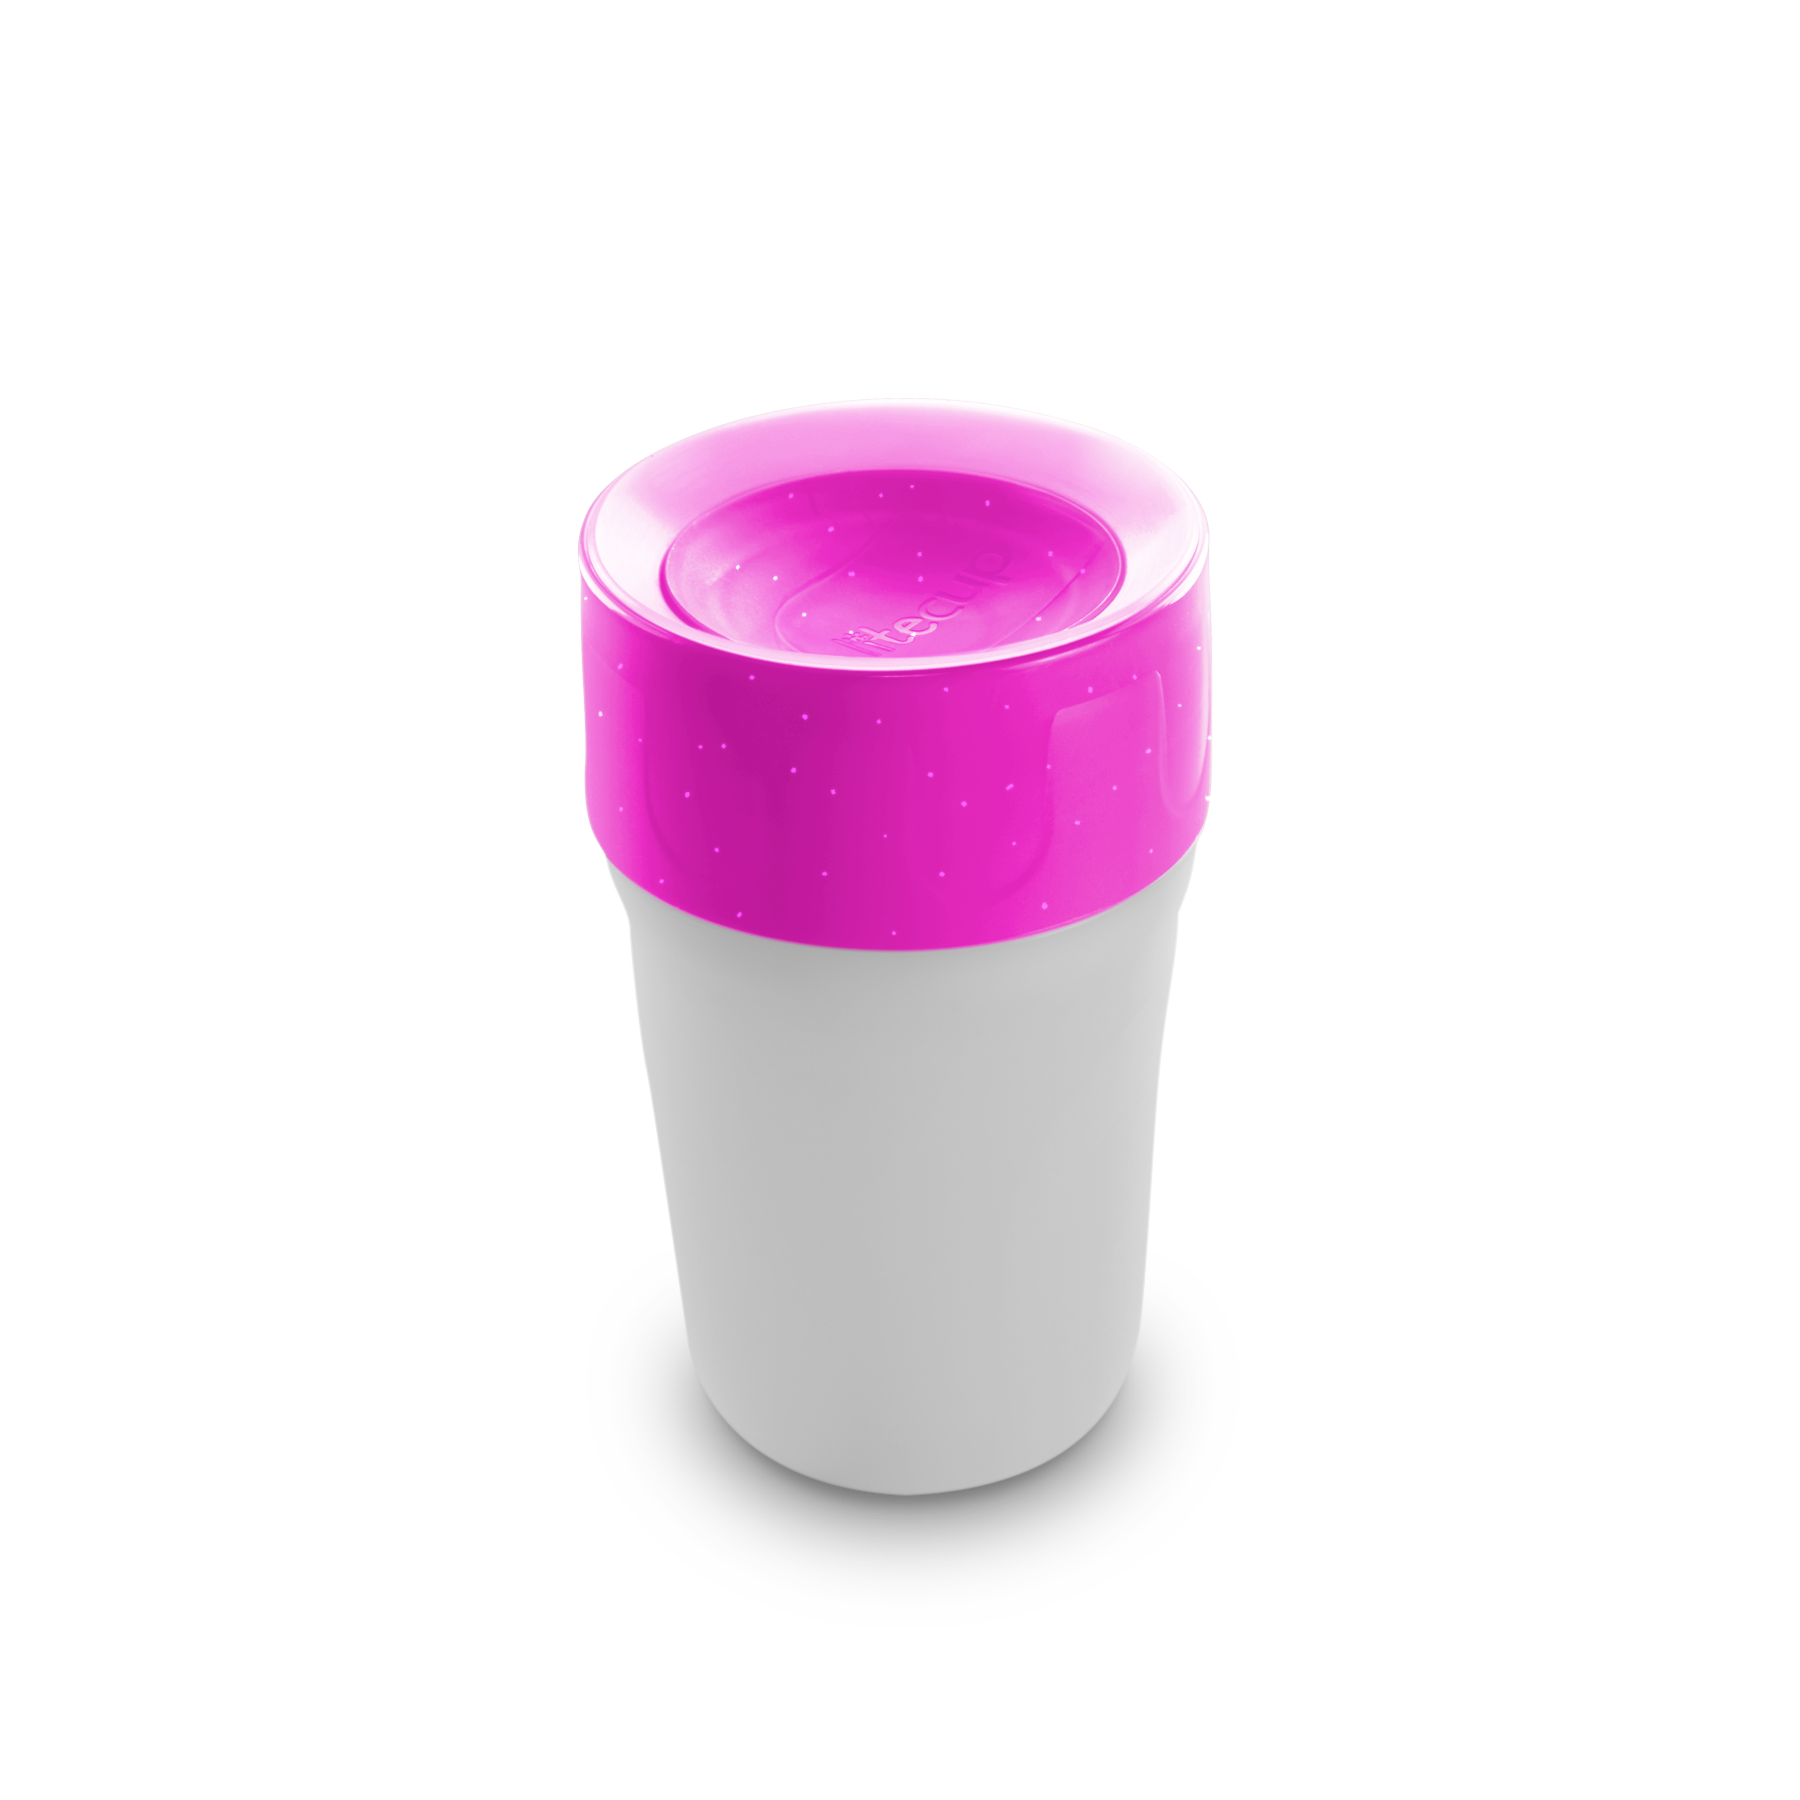 Sippy Cup Non-Spill Pink *NEW*